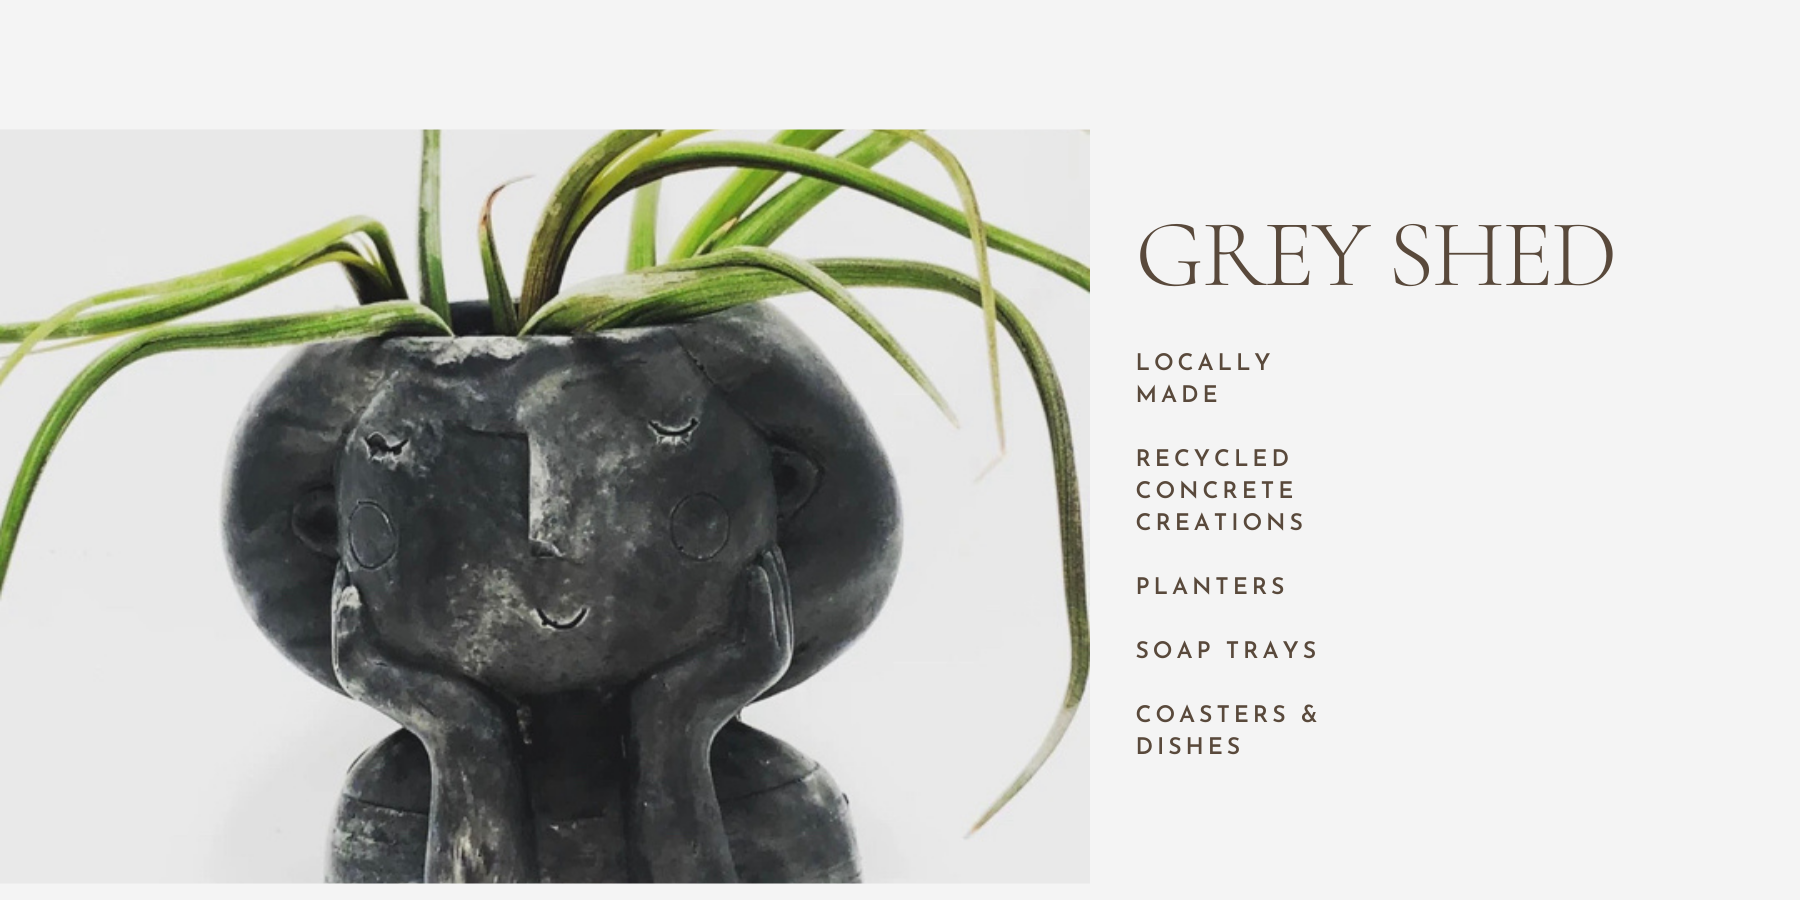 Unique, beautiful, handcrafted designs. GreyShed is a unique company that creates planters & pots, the coolest soap trays, necklaces, candle holders, wall decor, stationery items, and more! out of reusable concrete.  